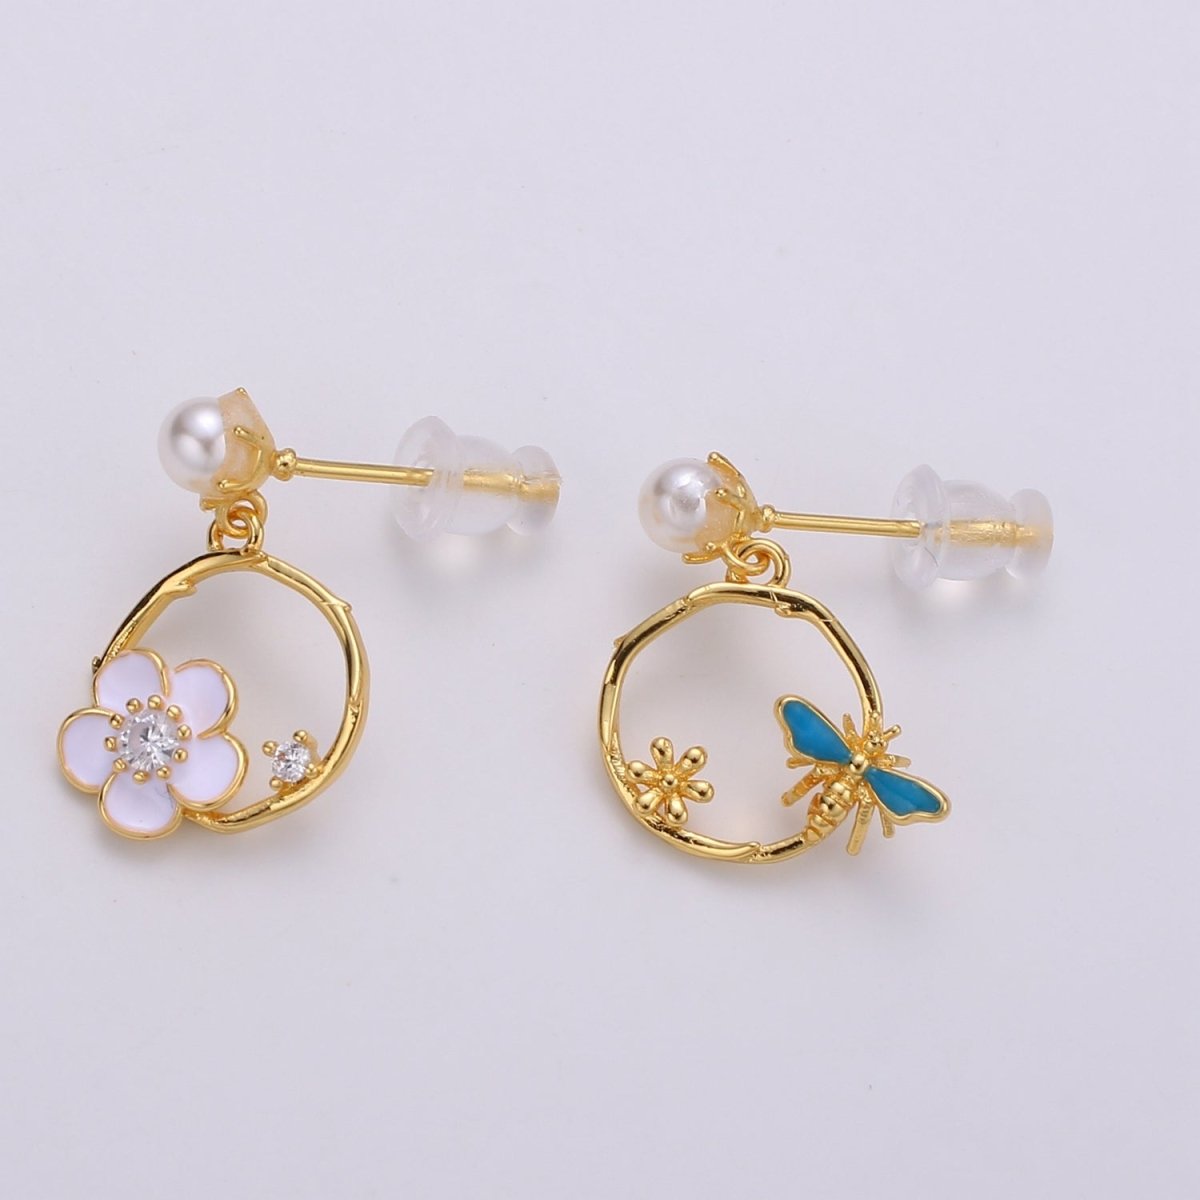 Gold Bee and Flower earrings, Studs, 13k Gold Filled Mismatched earrings, Gifts for kids Valentine Gift Jewelry Q-372 Q-373 - DLUXCA